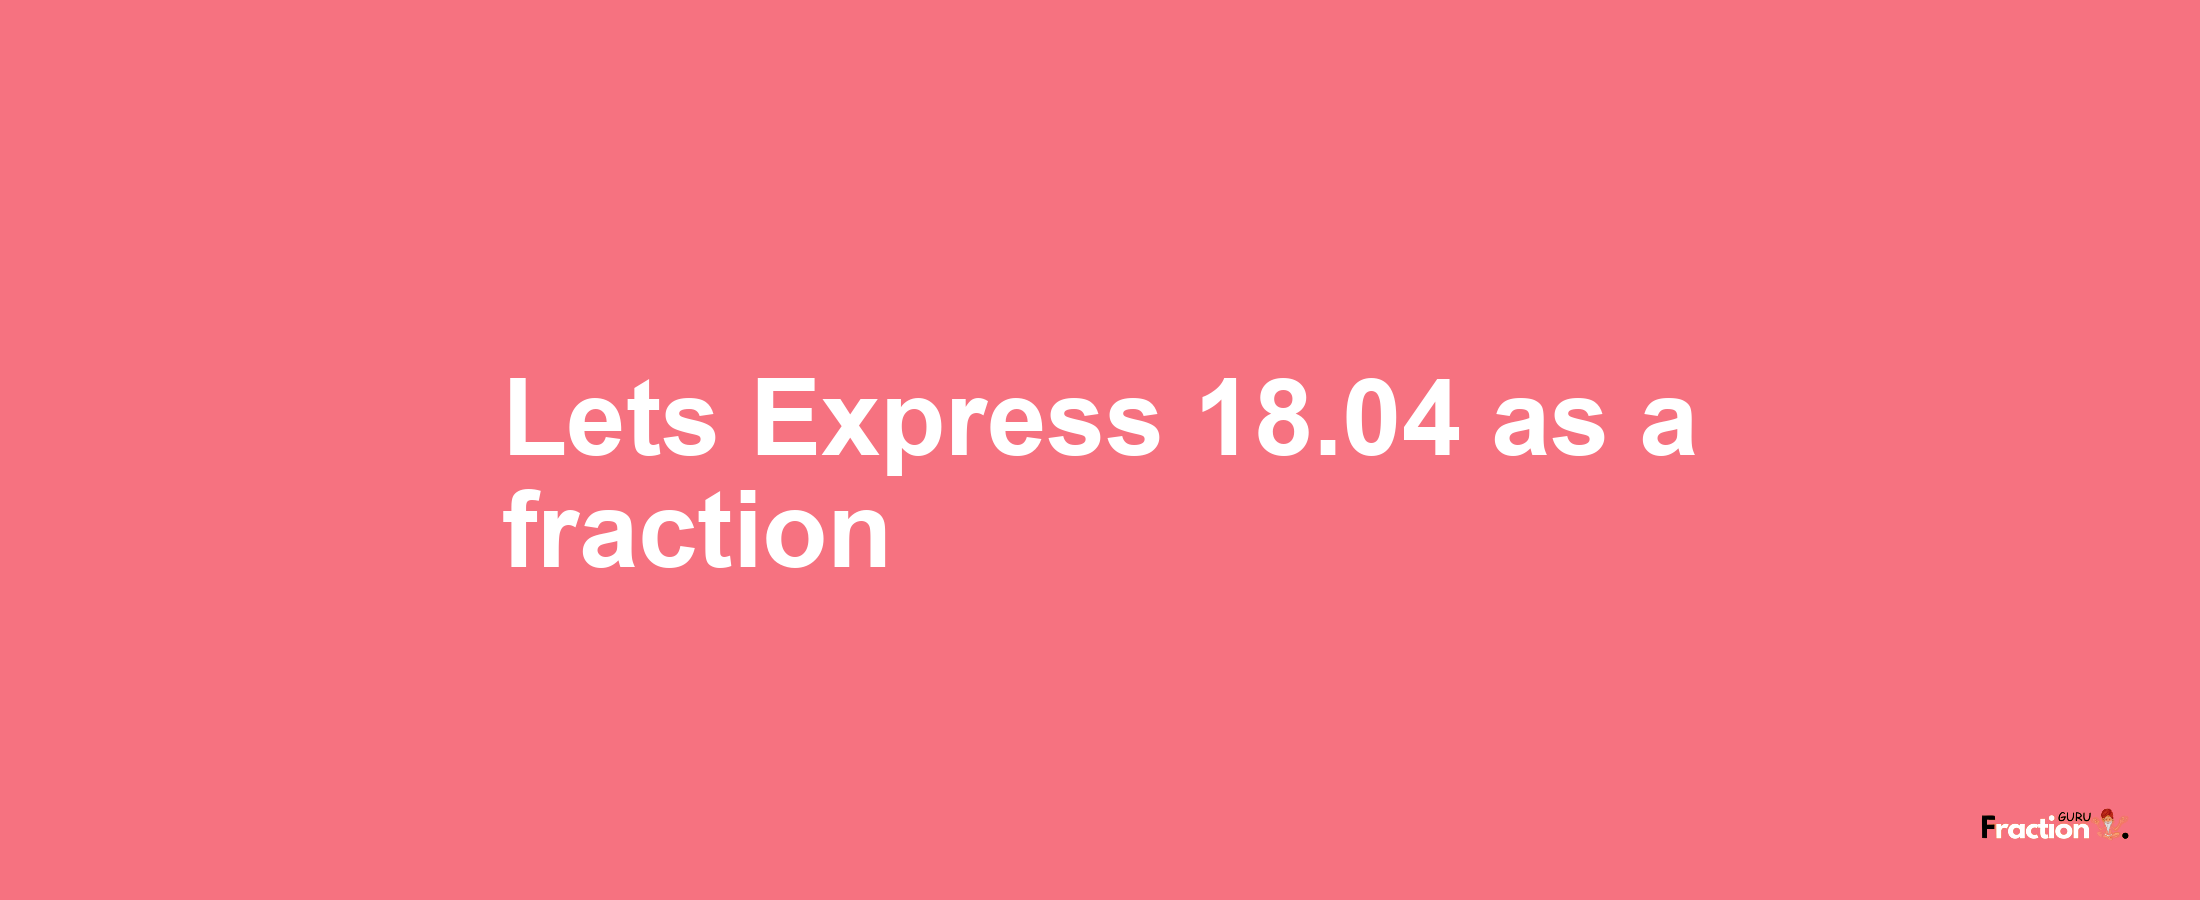 Lets Express 18.04 as afraction